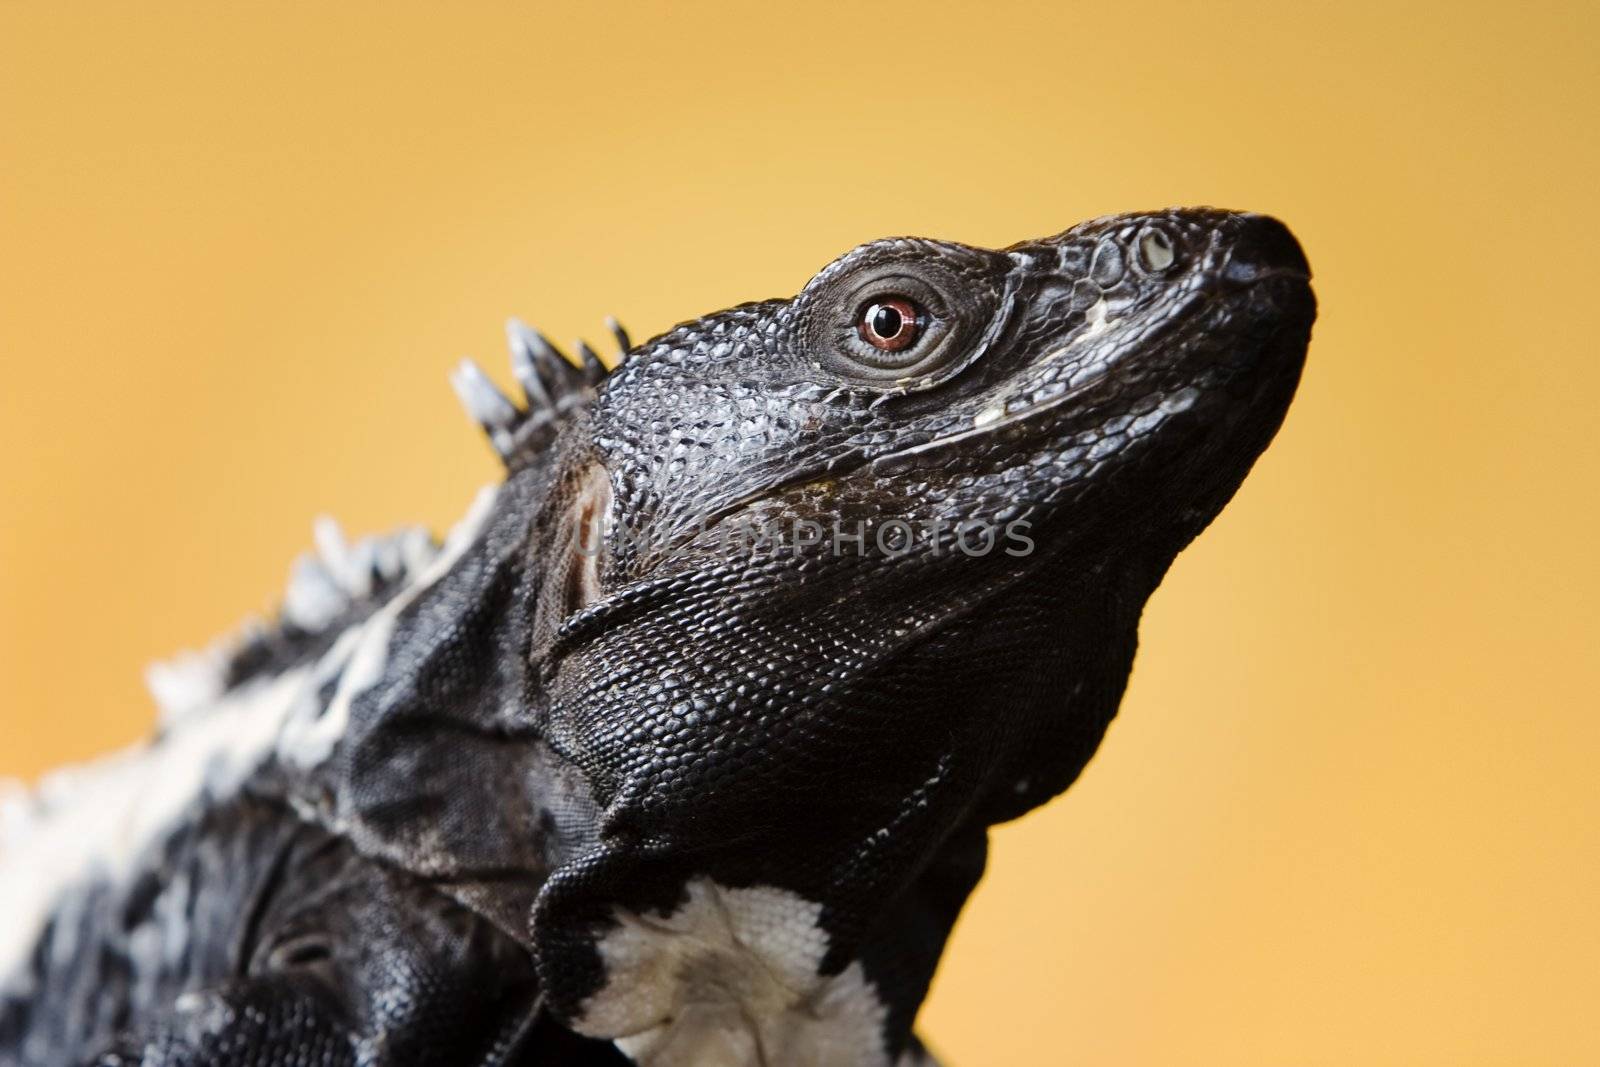 Black and white spiny tailed iguana in a studio setting.